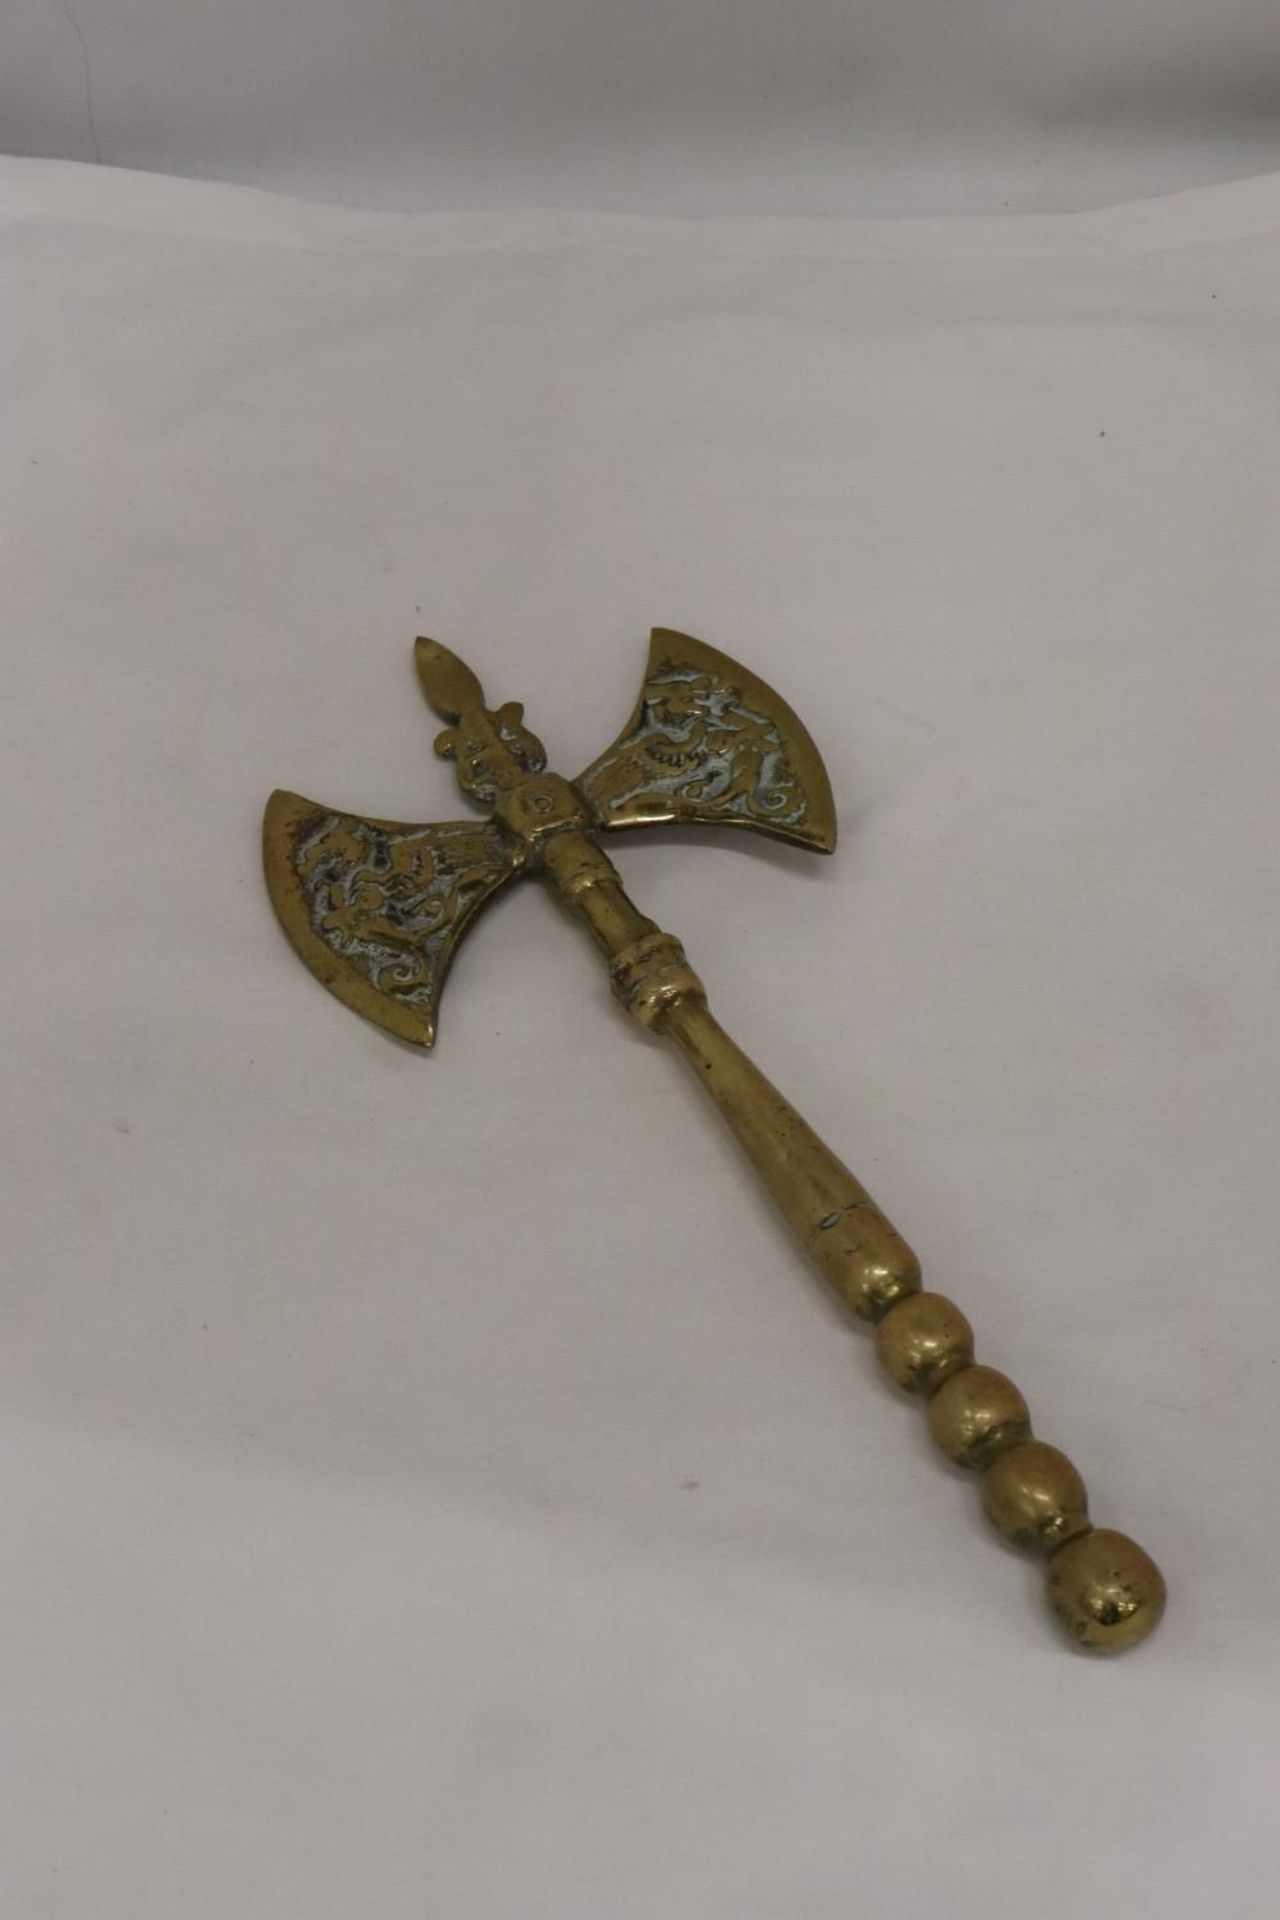 A DOUBLE HEADED AXE - Image 4 of 6